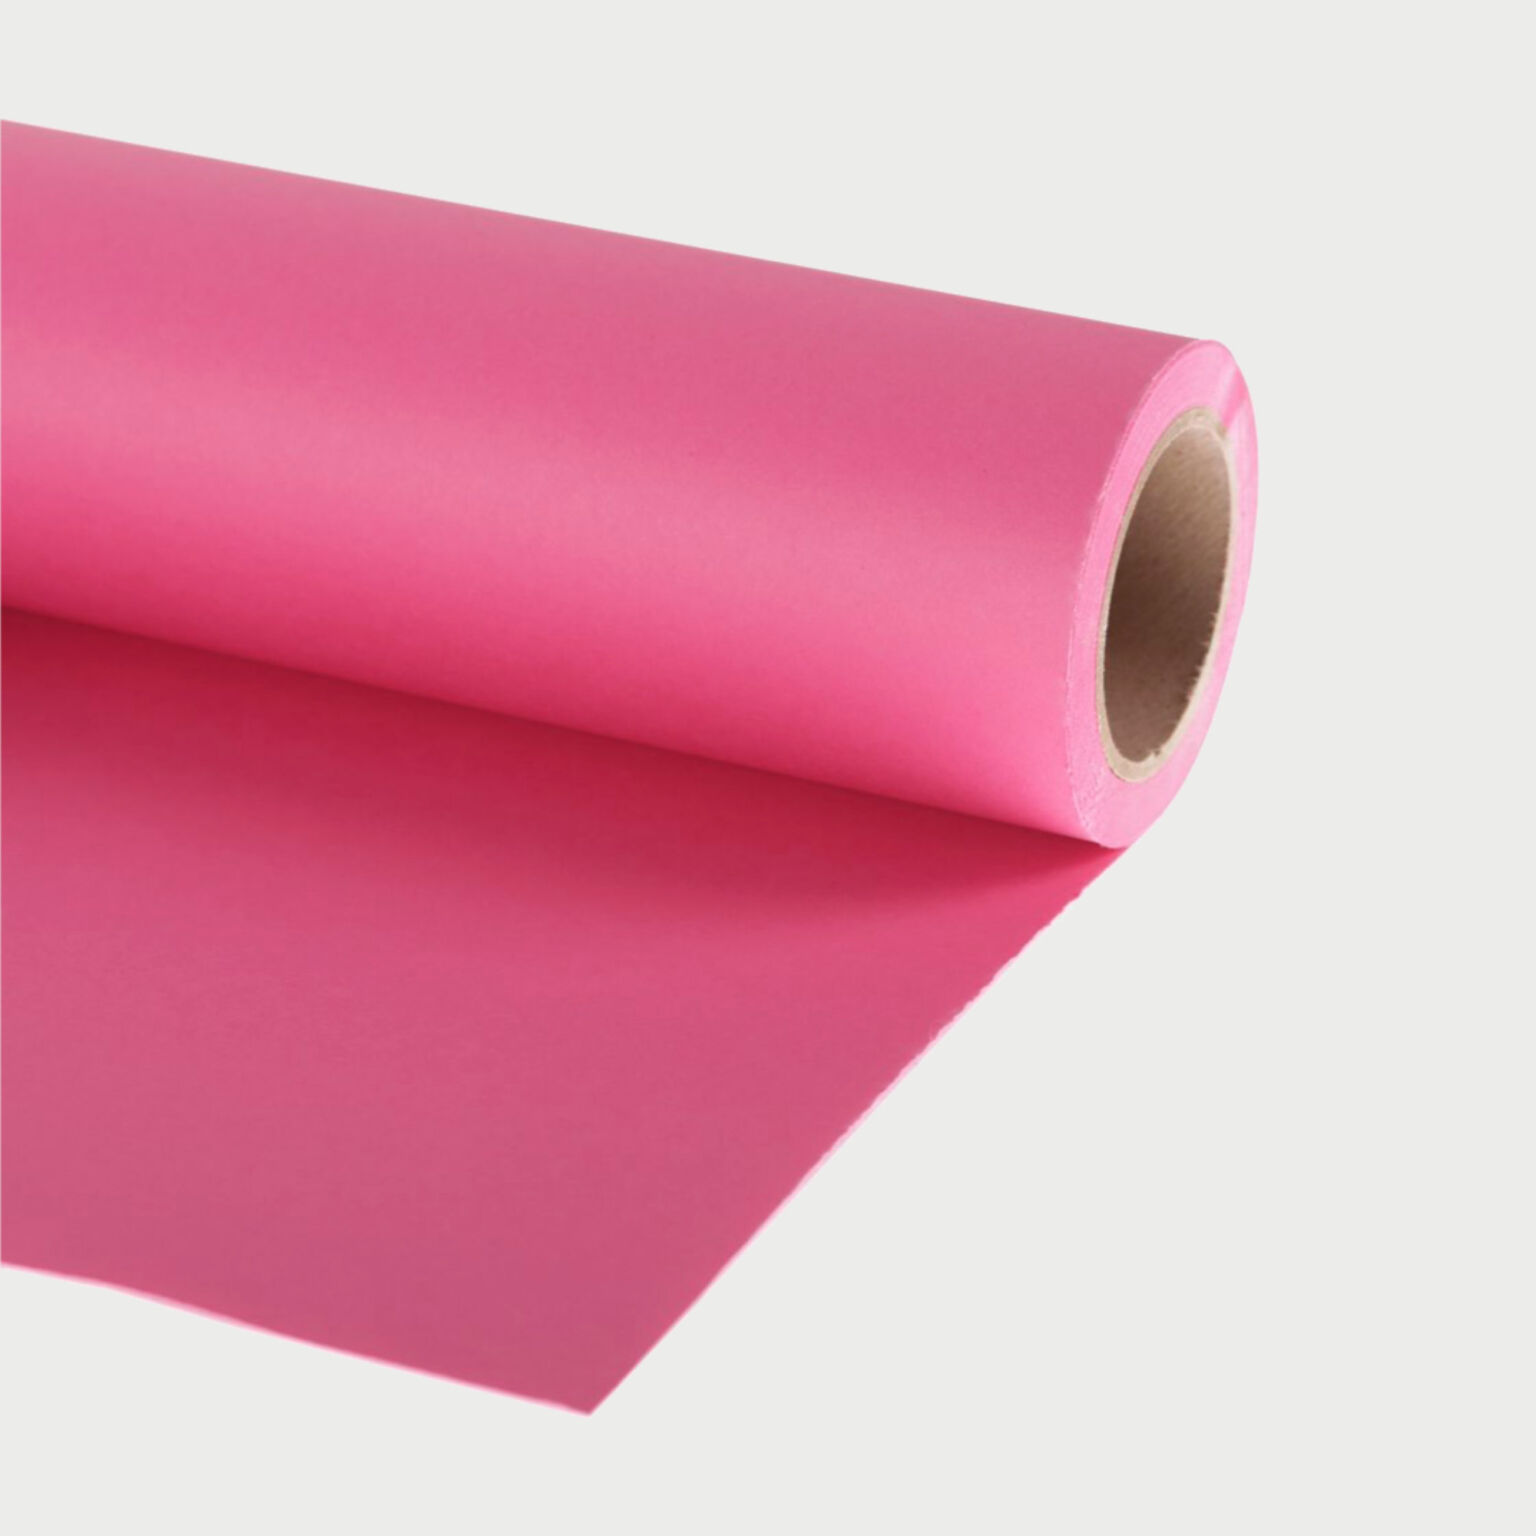 Manfrotto Paper Gala Pink Seamless Background Paper 2 72m X 11m